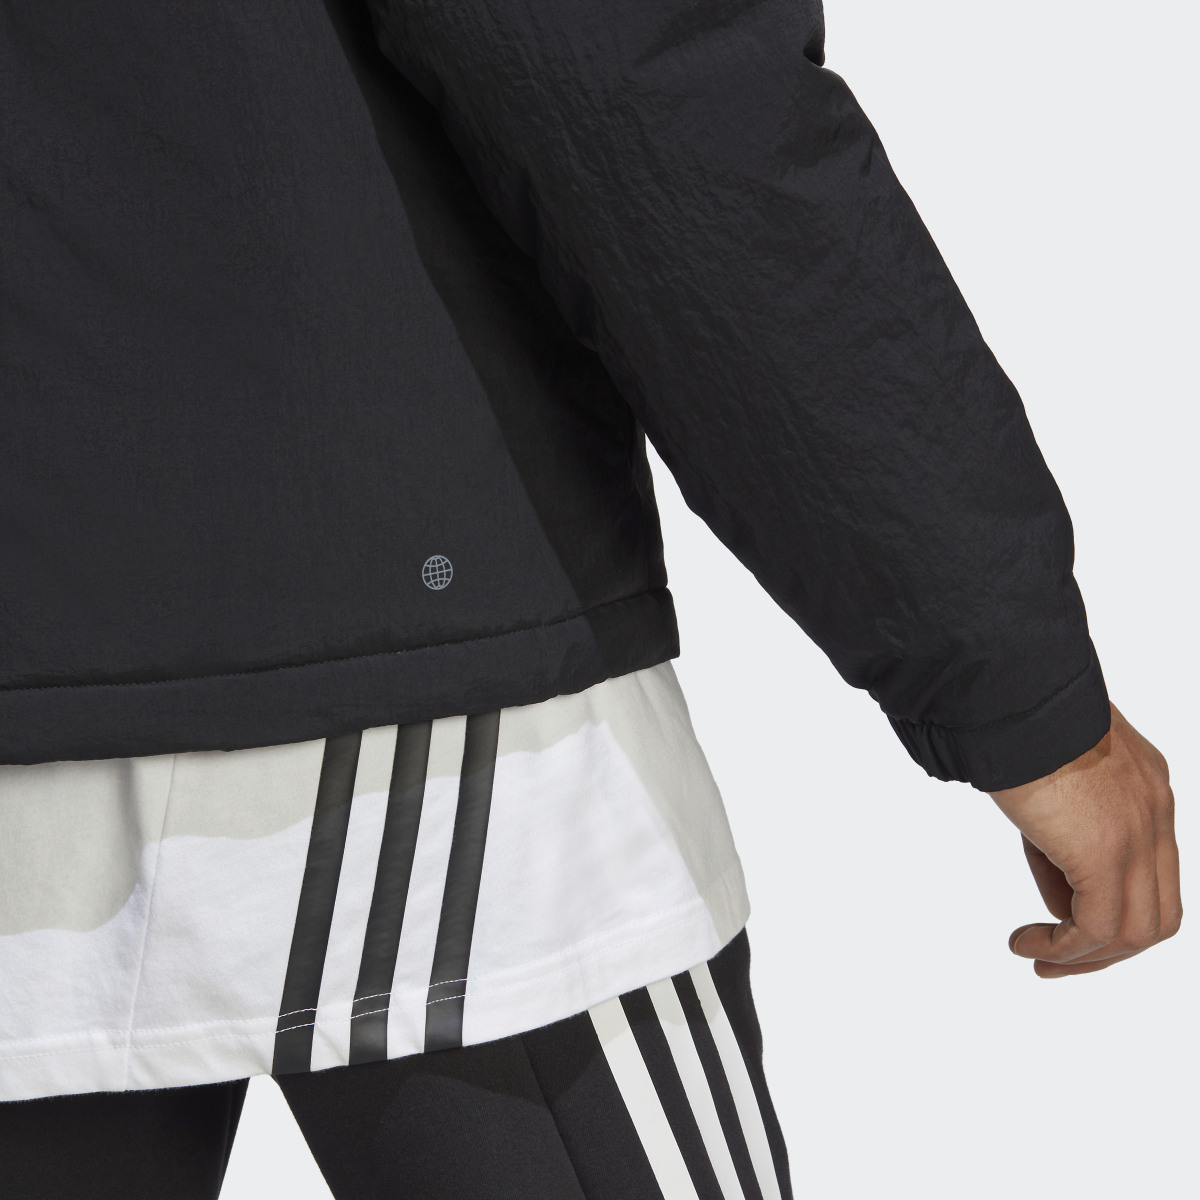 Adidas BSC Sturdy Insulated Hooded Jacket. 8